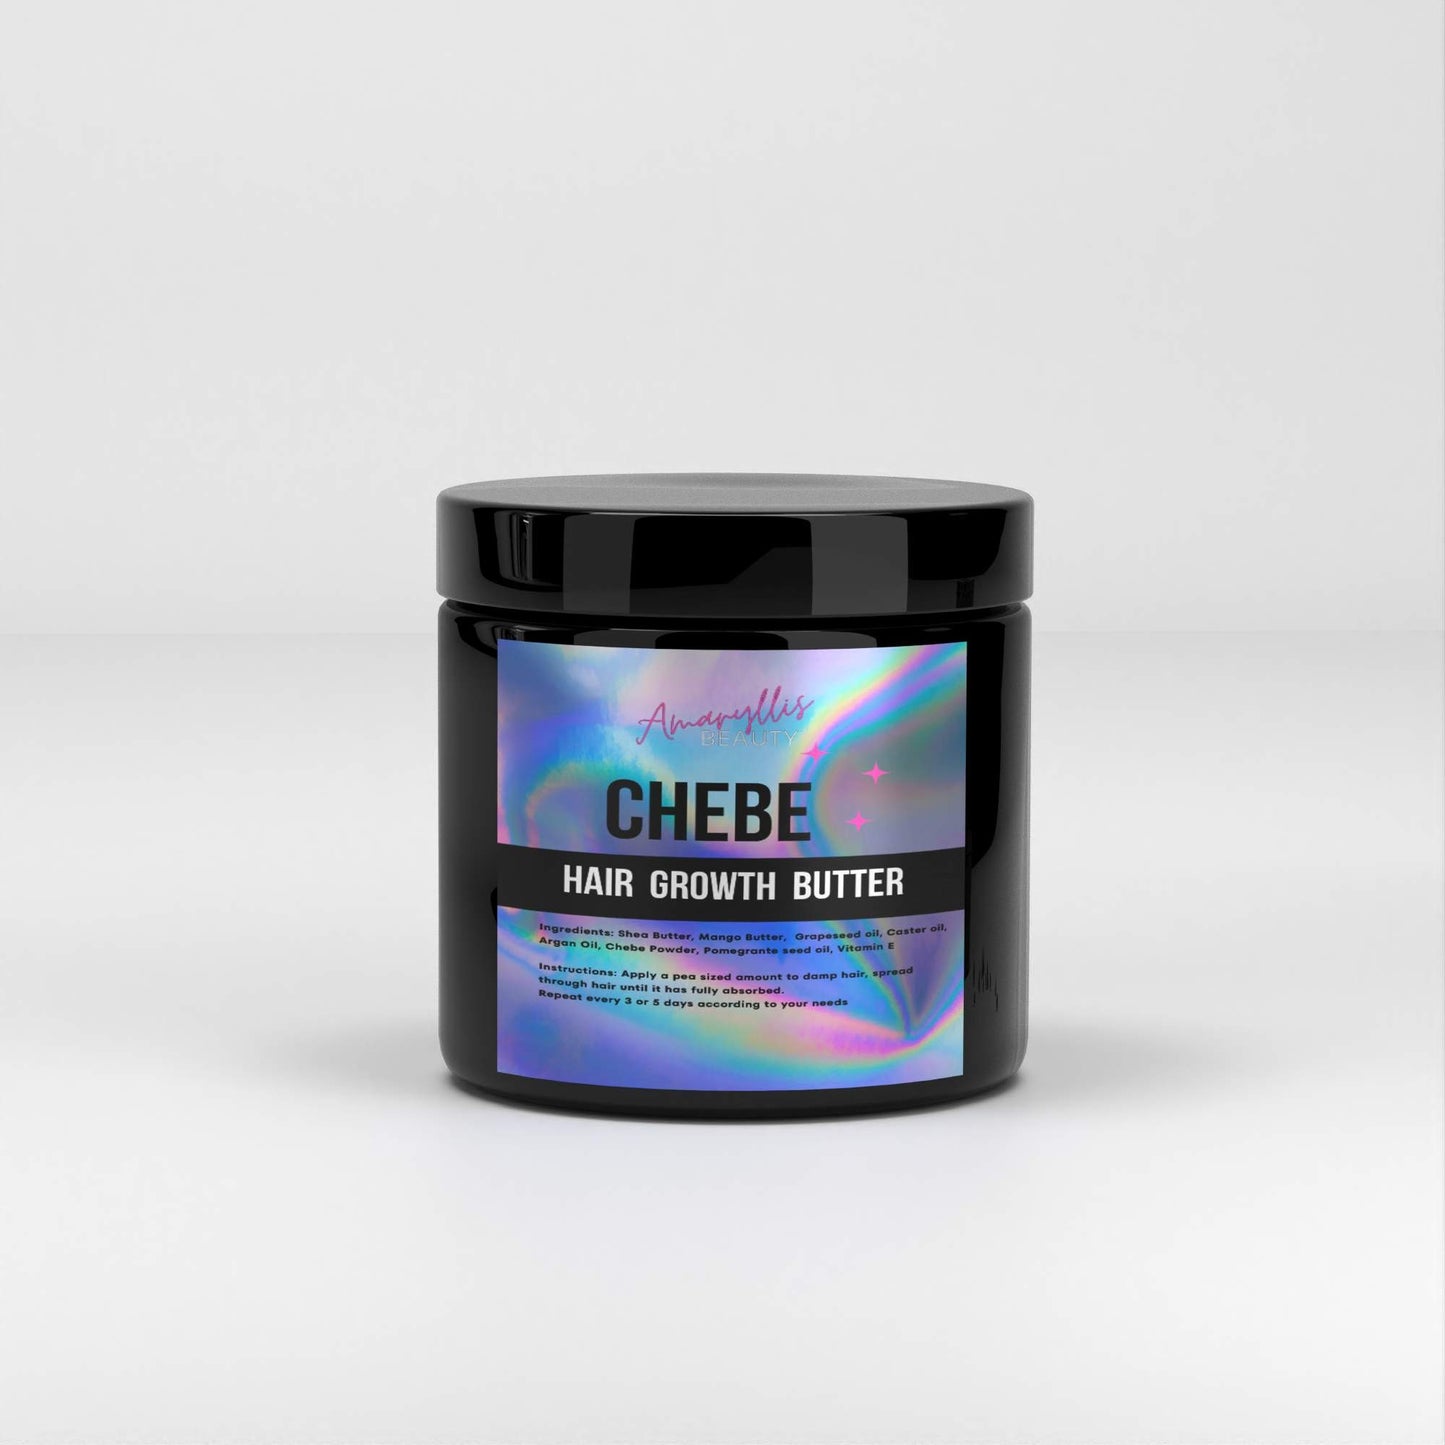 CHEBE HAIR GROWTH BUTTER